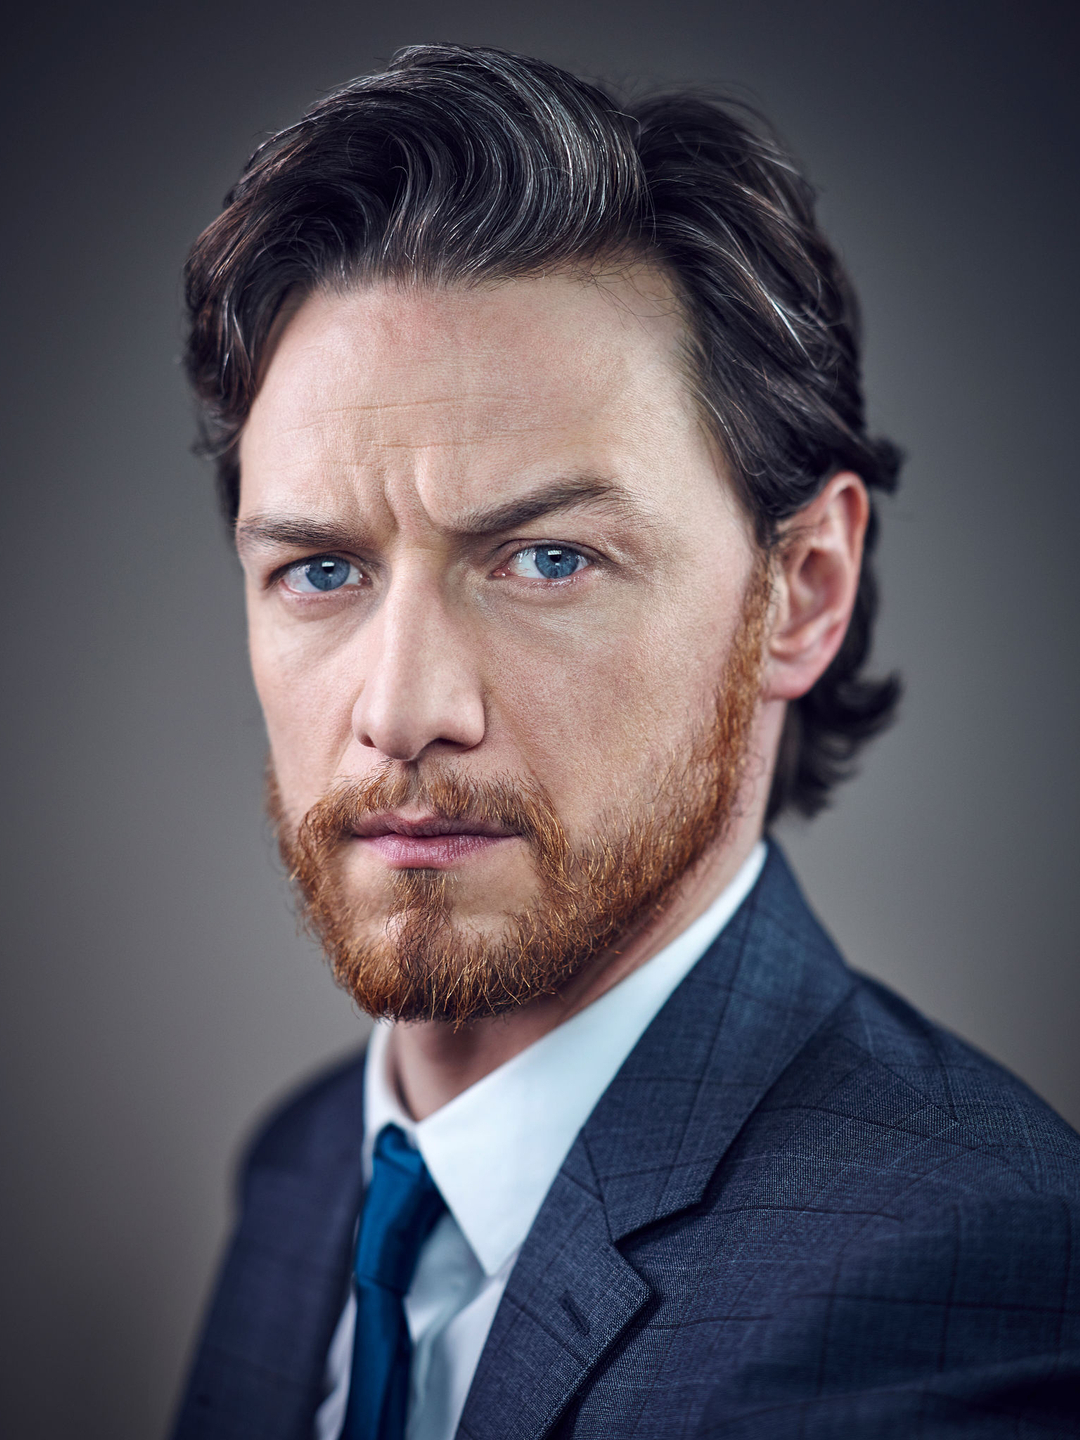 James McAvoy personal traits